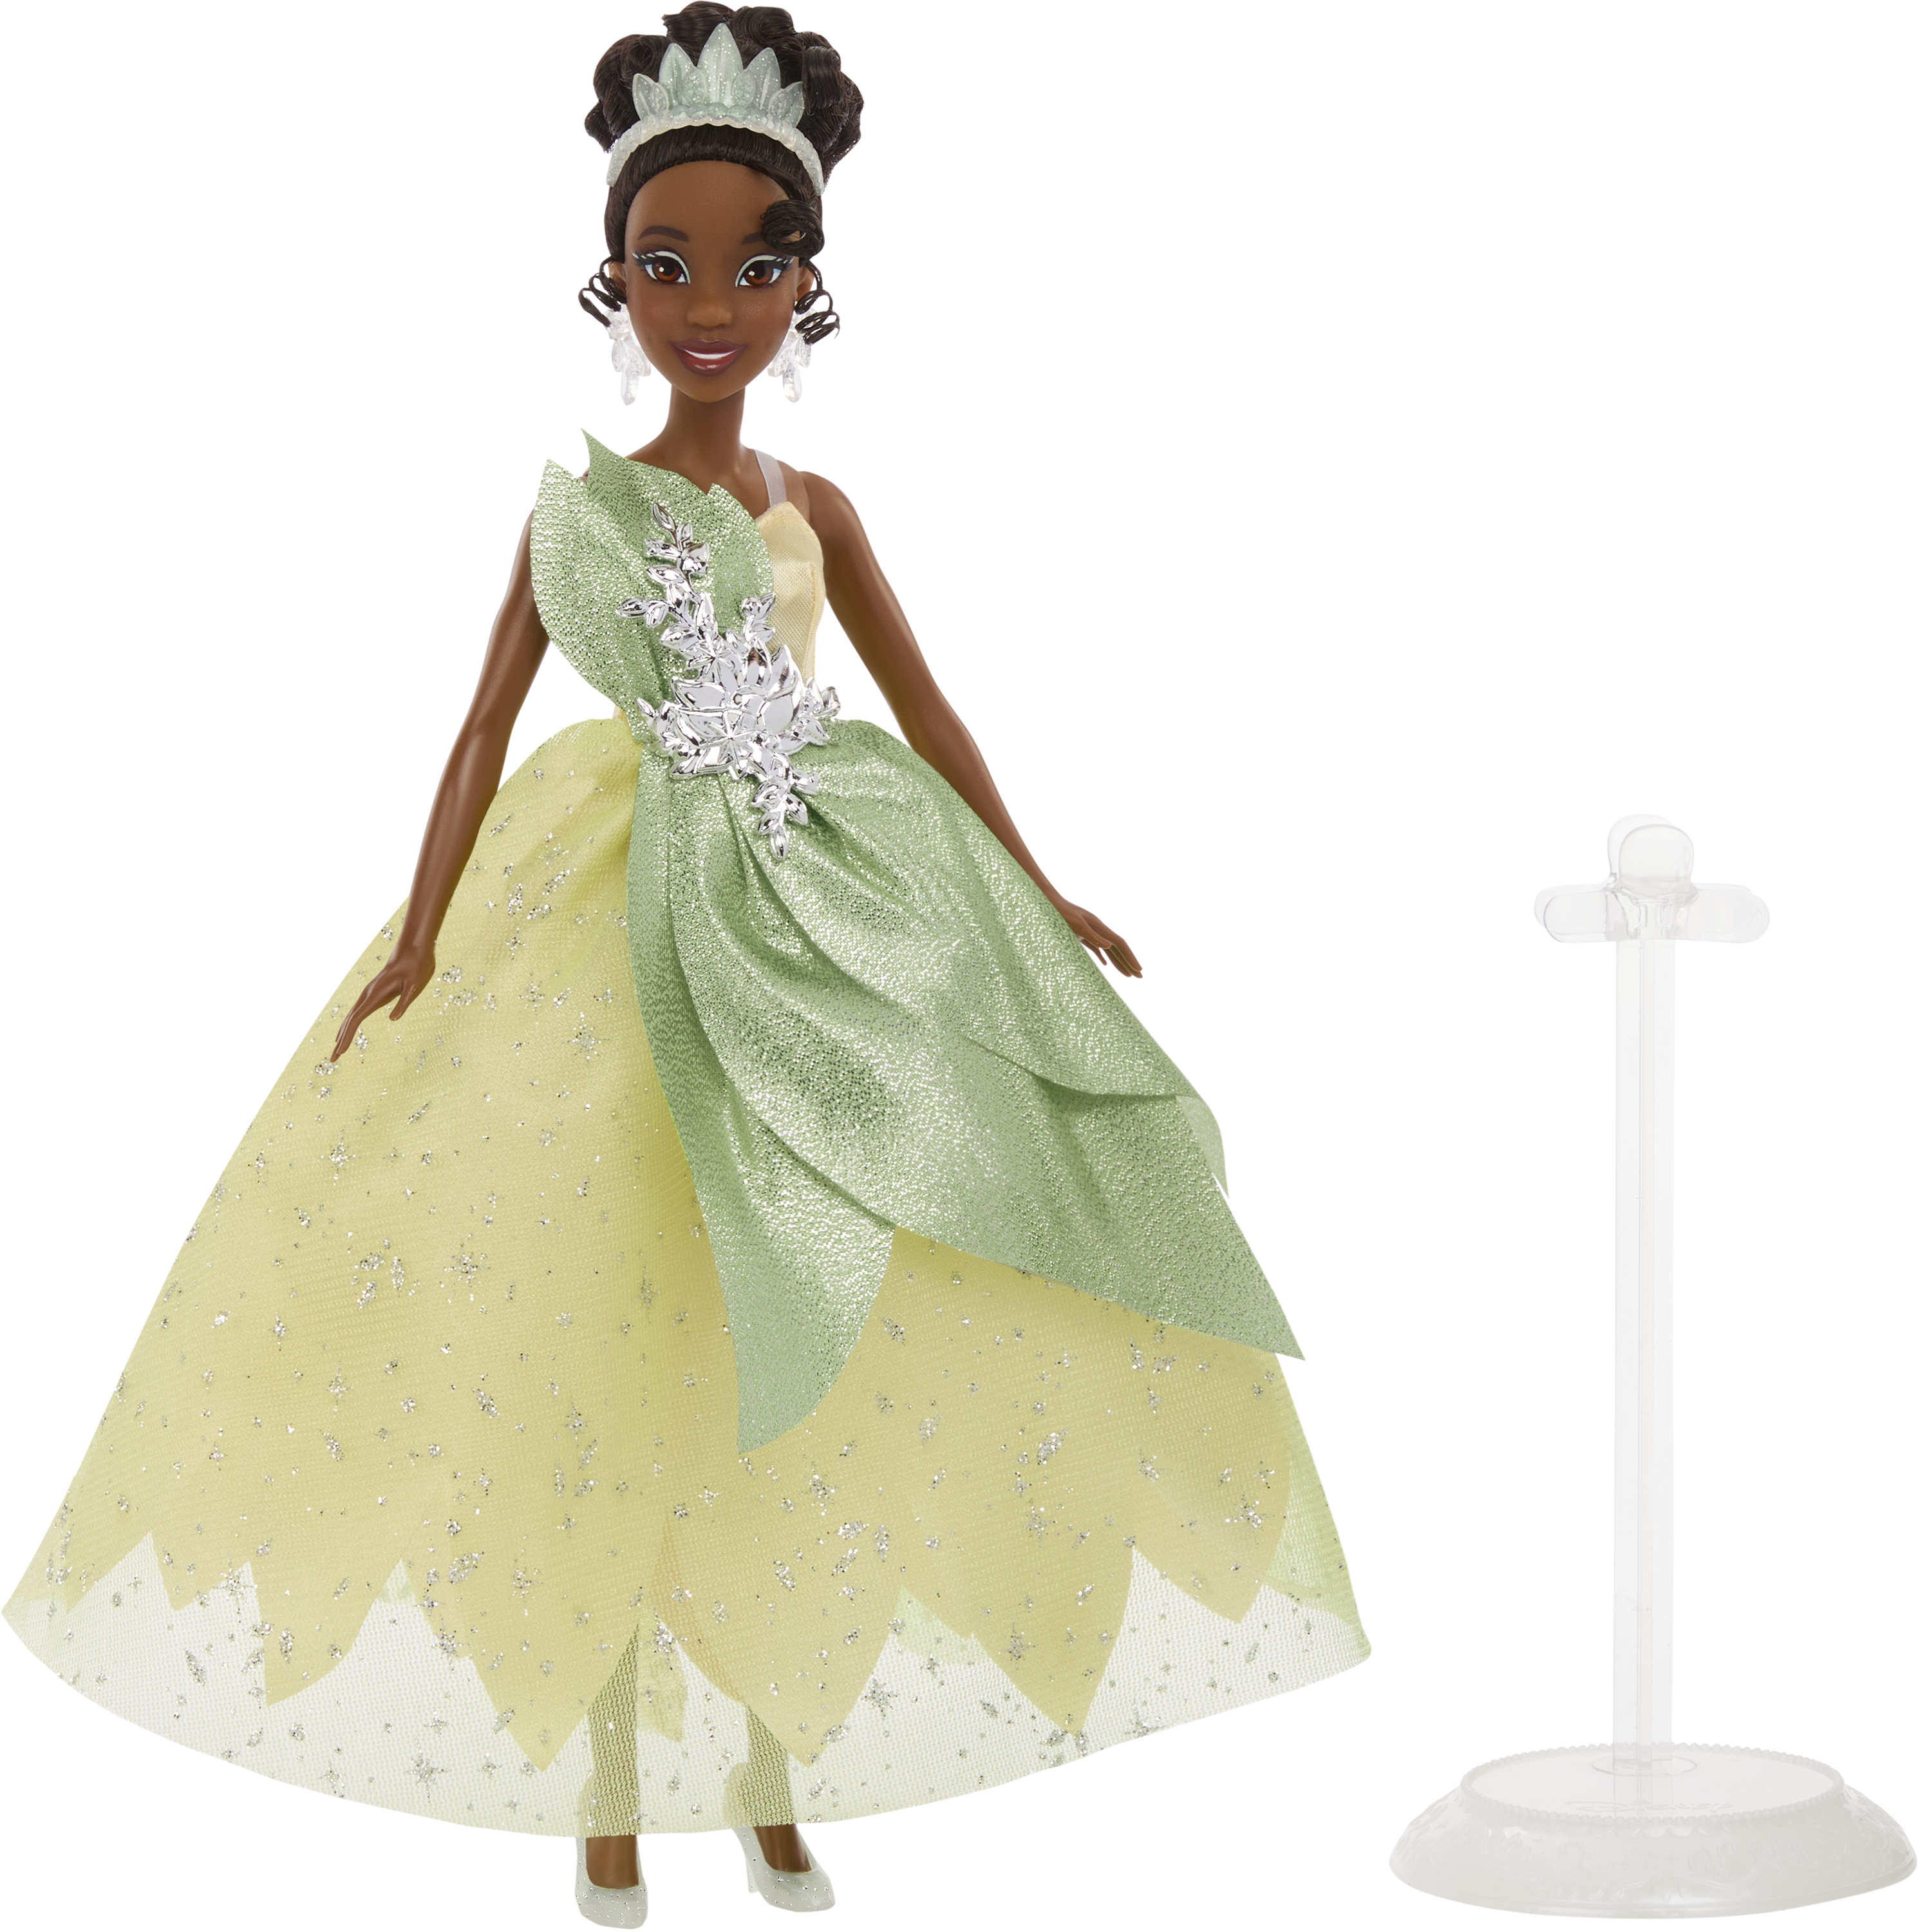 Disney Toys, Disney100 Collector Tiana Doll, Gifts for Kids and Collectors - image 5 of 6